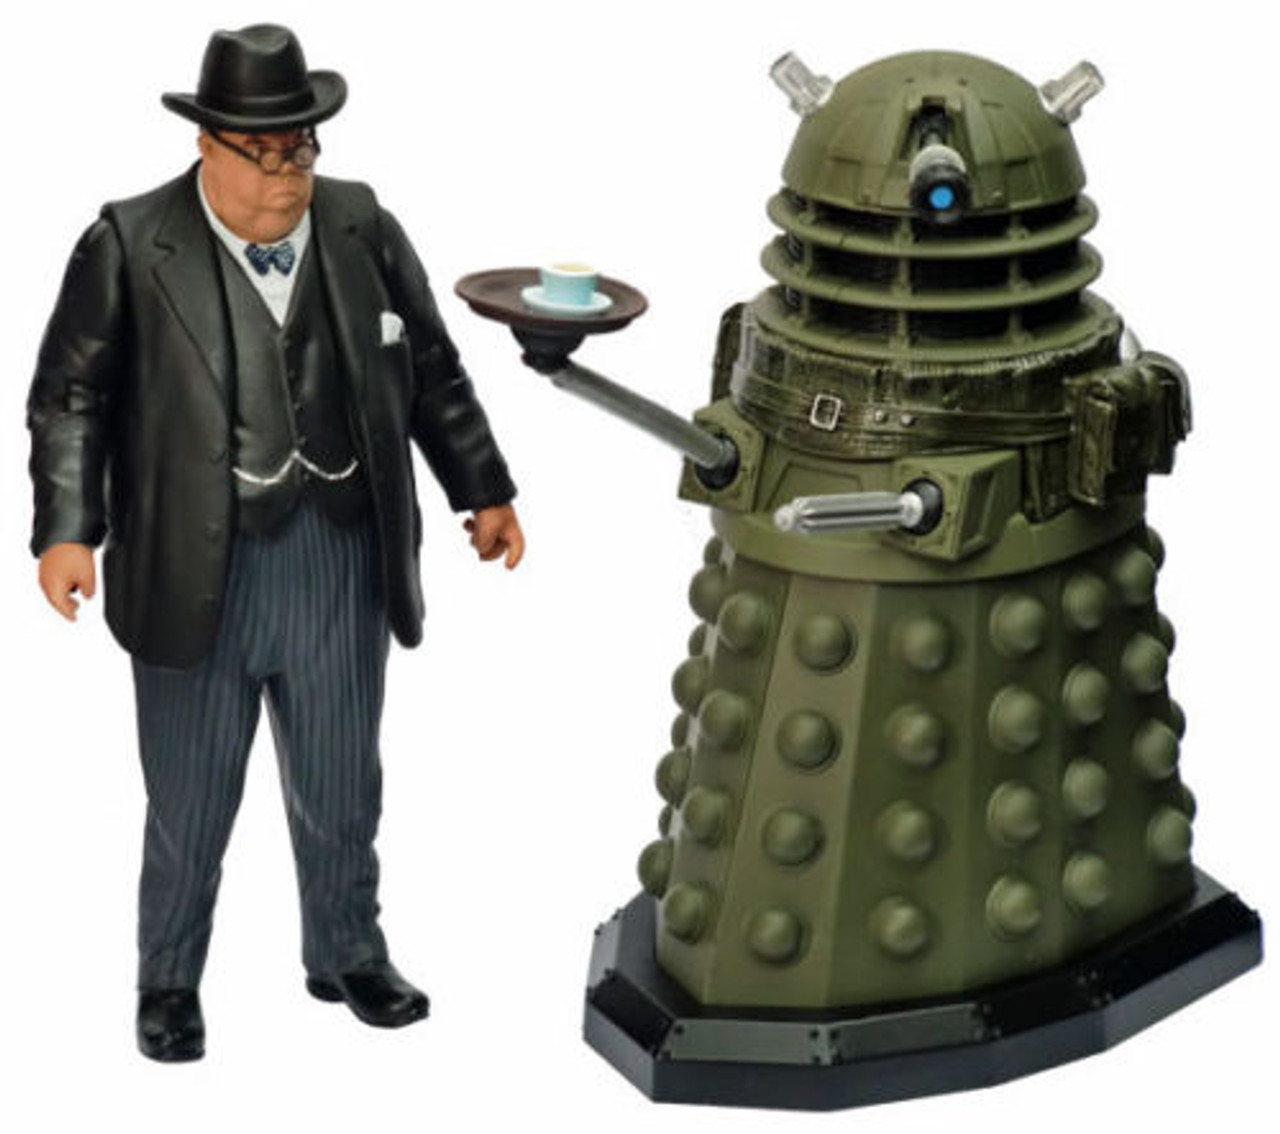 doctor who figures for sale